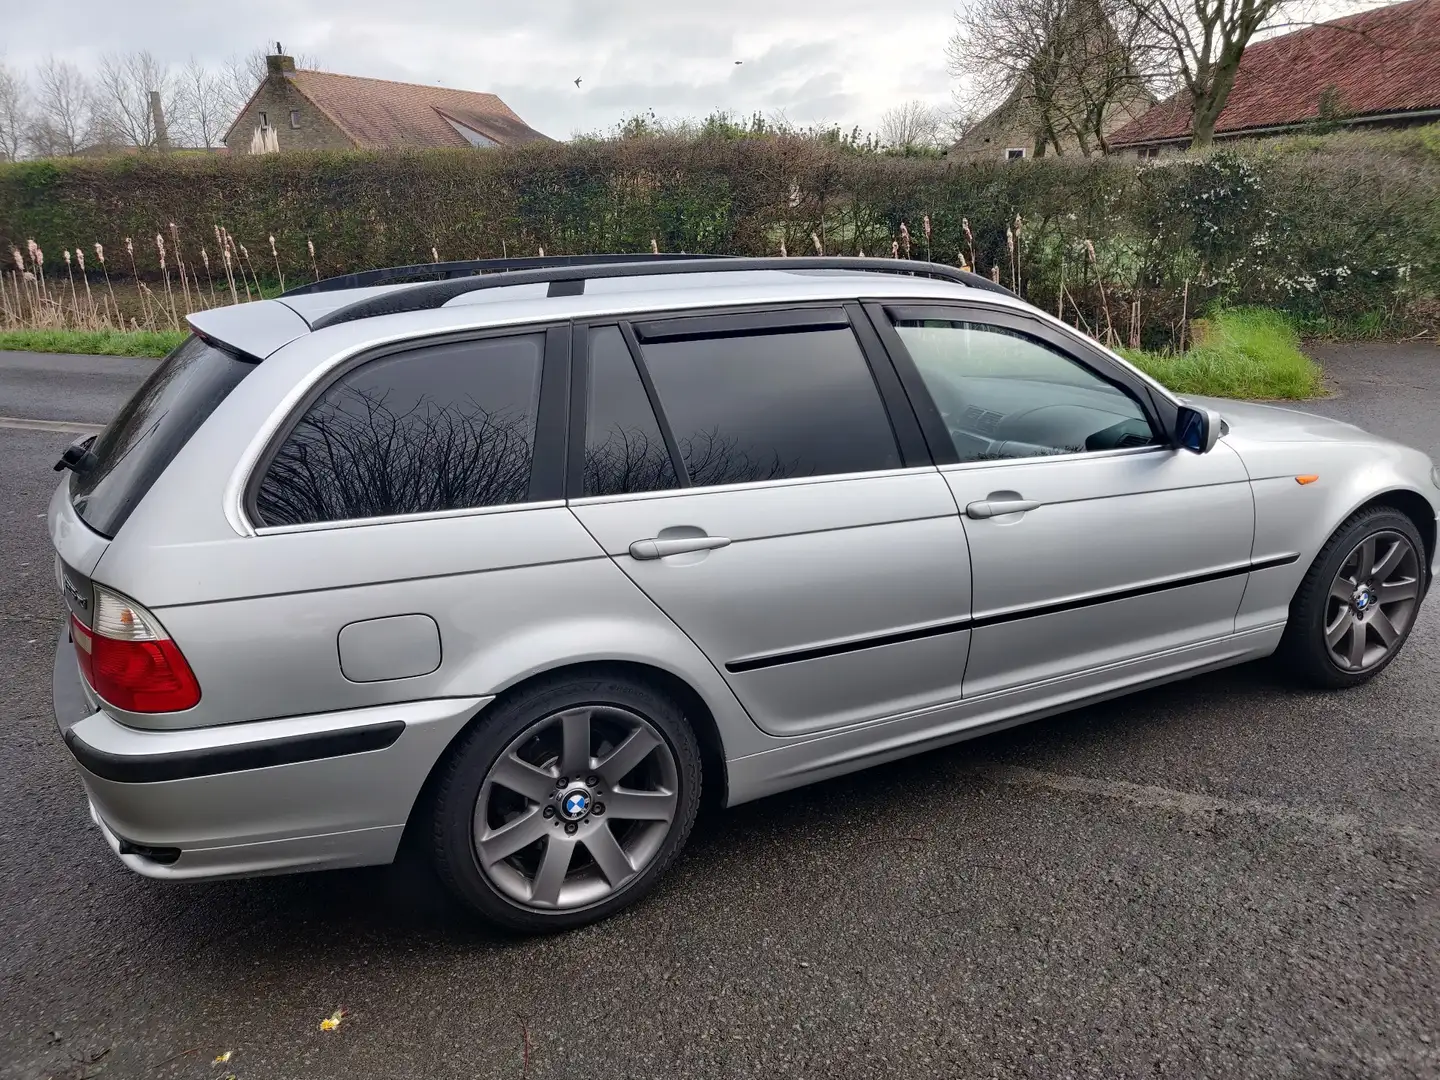 BMW 325 325Xi Touring - automatic - petrol & LPG Argent - 2